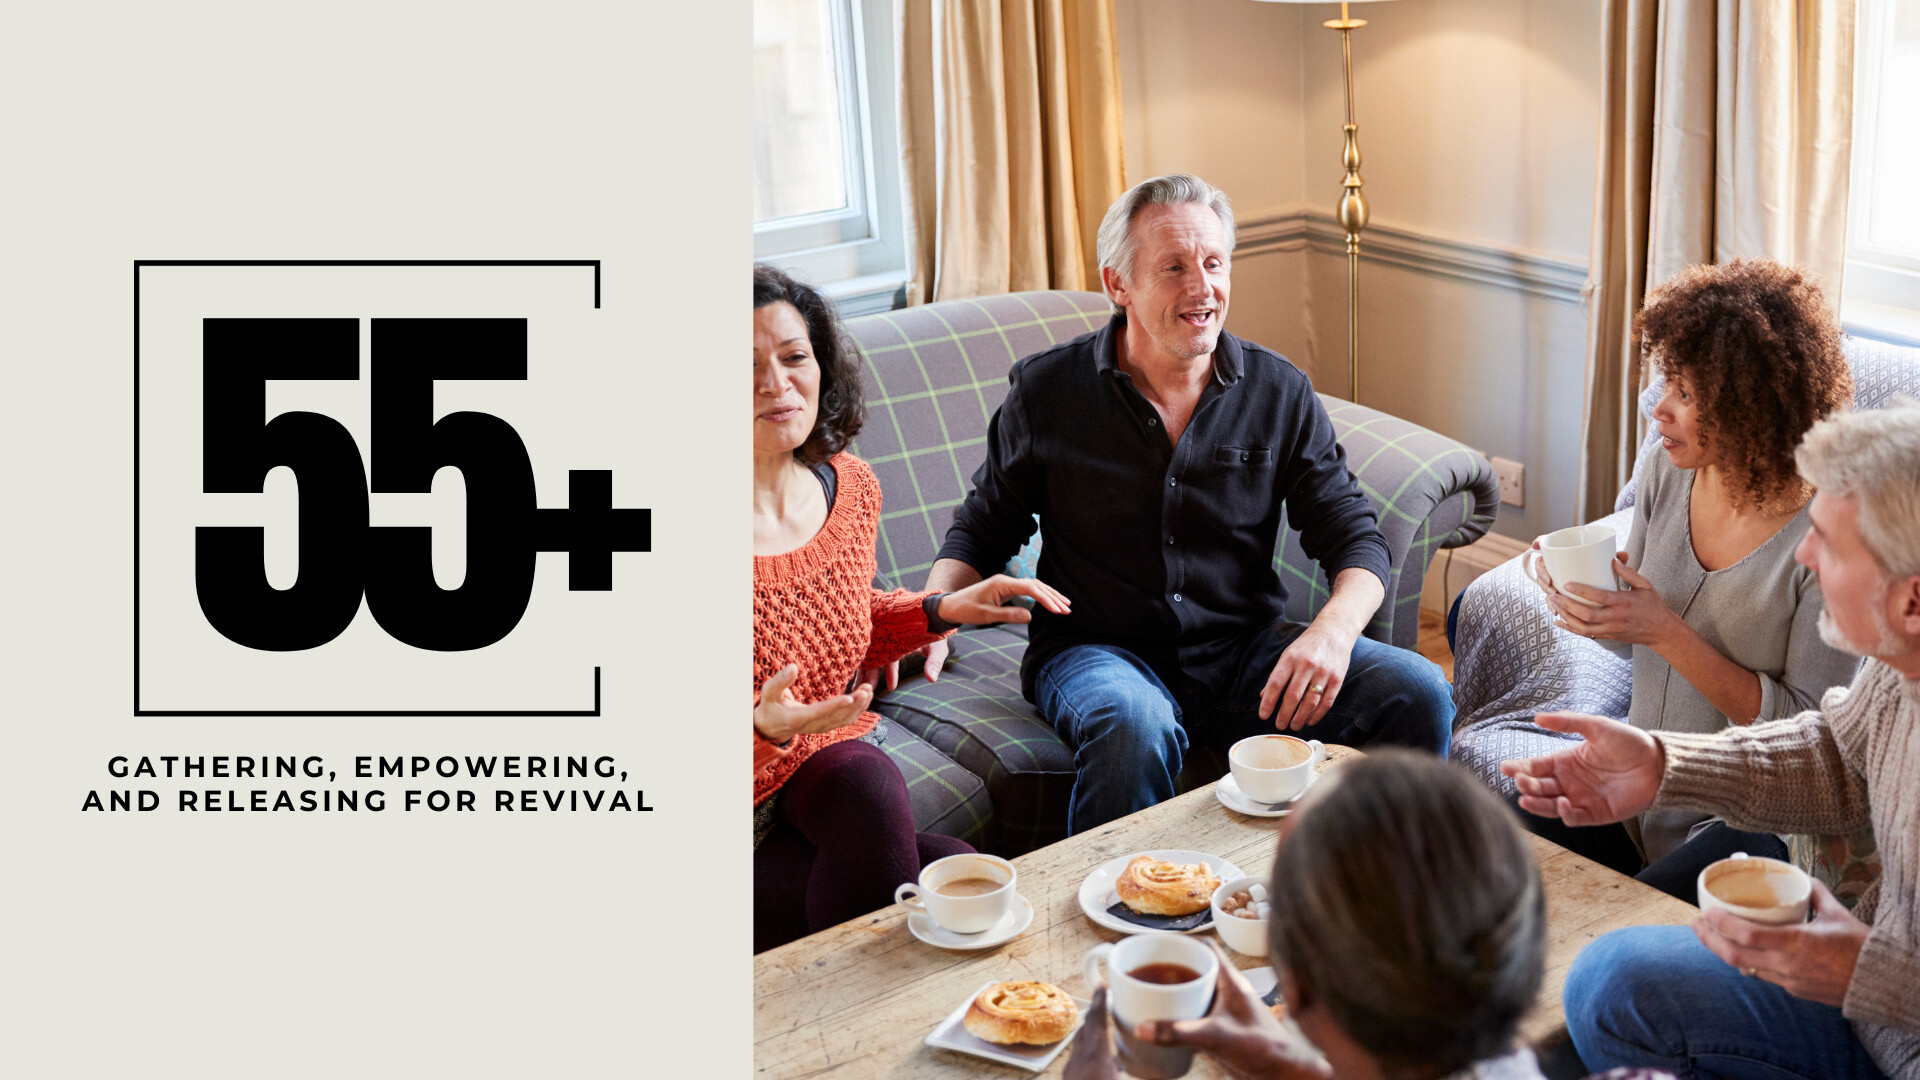 Join Eastpointe Church's 55+ Group and be empowered!